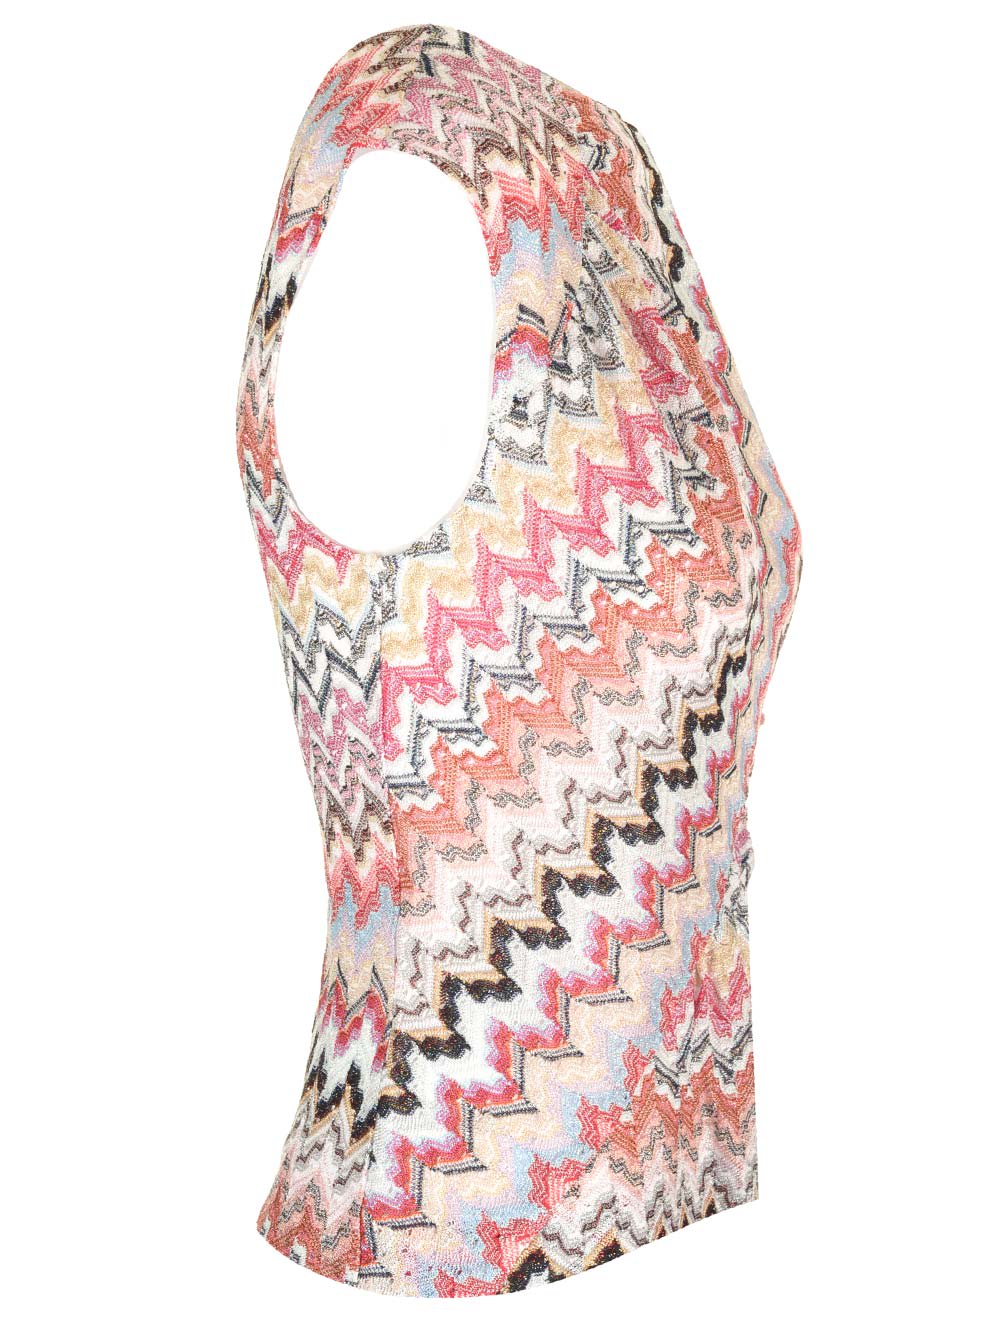 Shop Missoni Viscose Knit Top In Pink/white